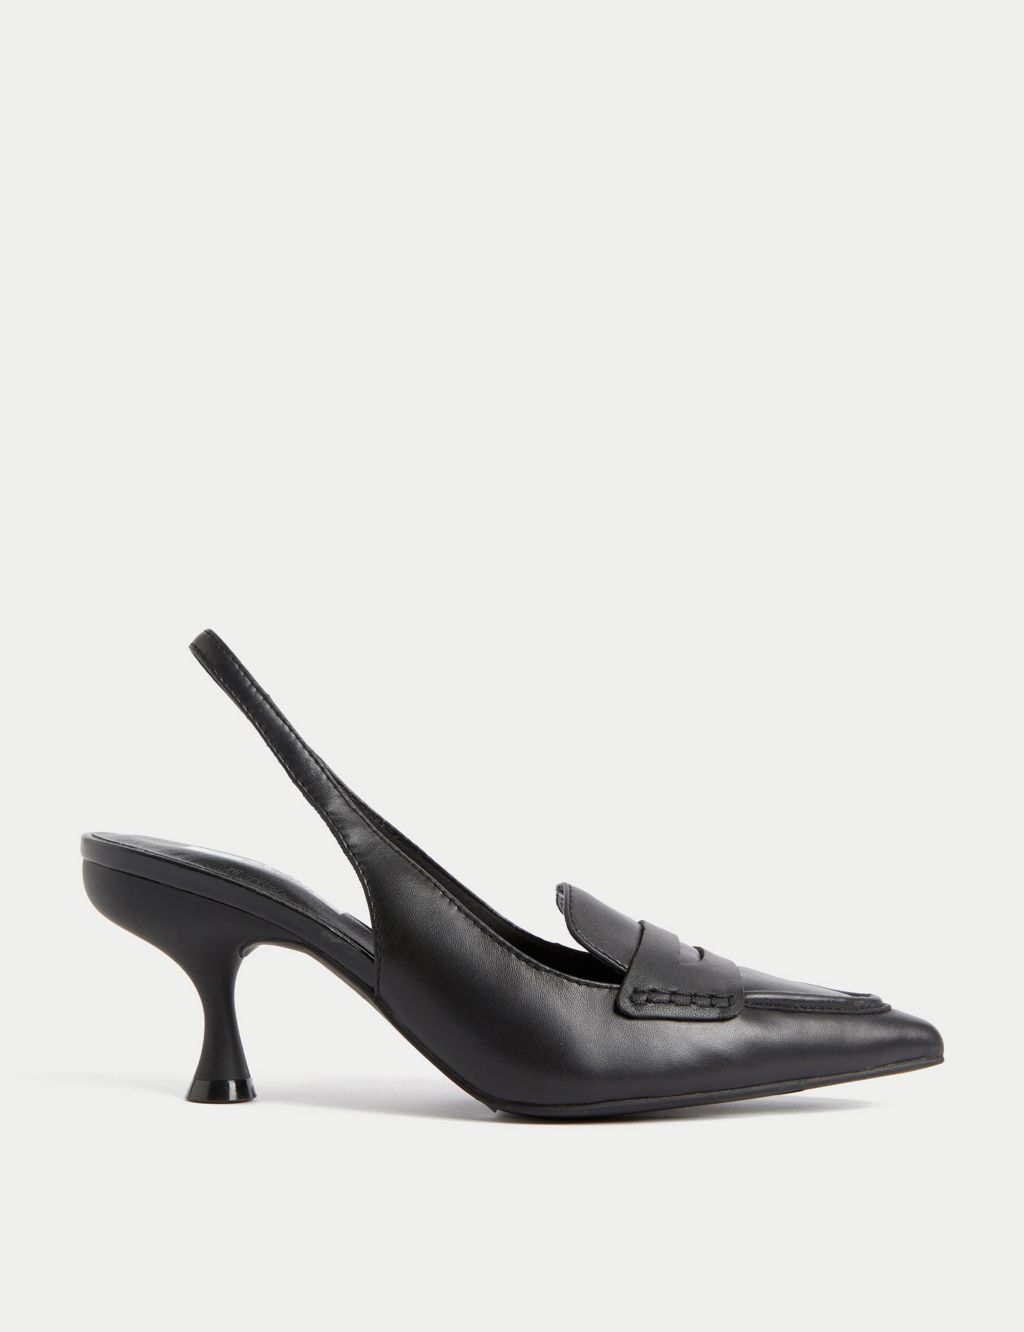 Black Patent Leather Luxury Classic Women Pumps Pointed Toe Thin